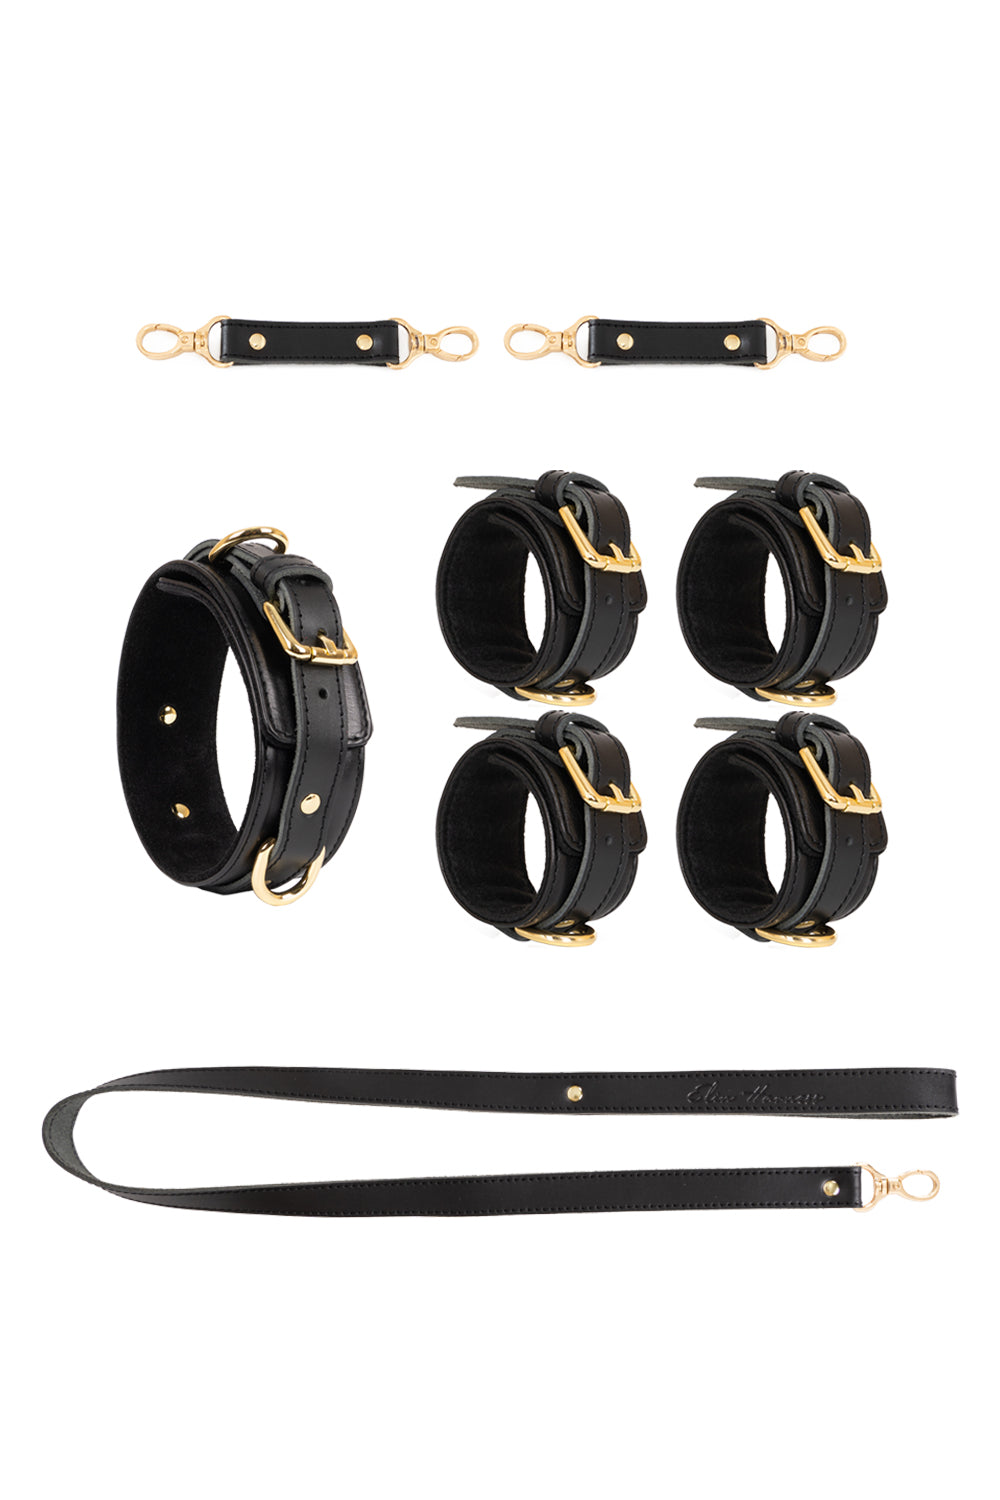 3 in 1 Leather Harness Bondage Set. 10 colors